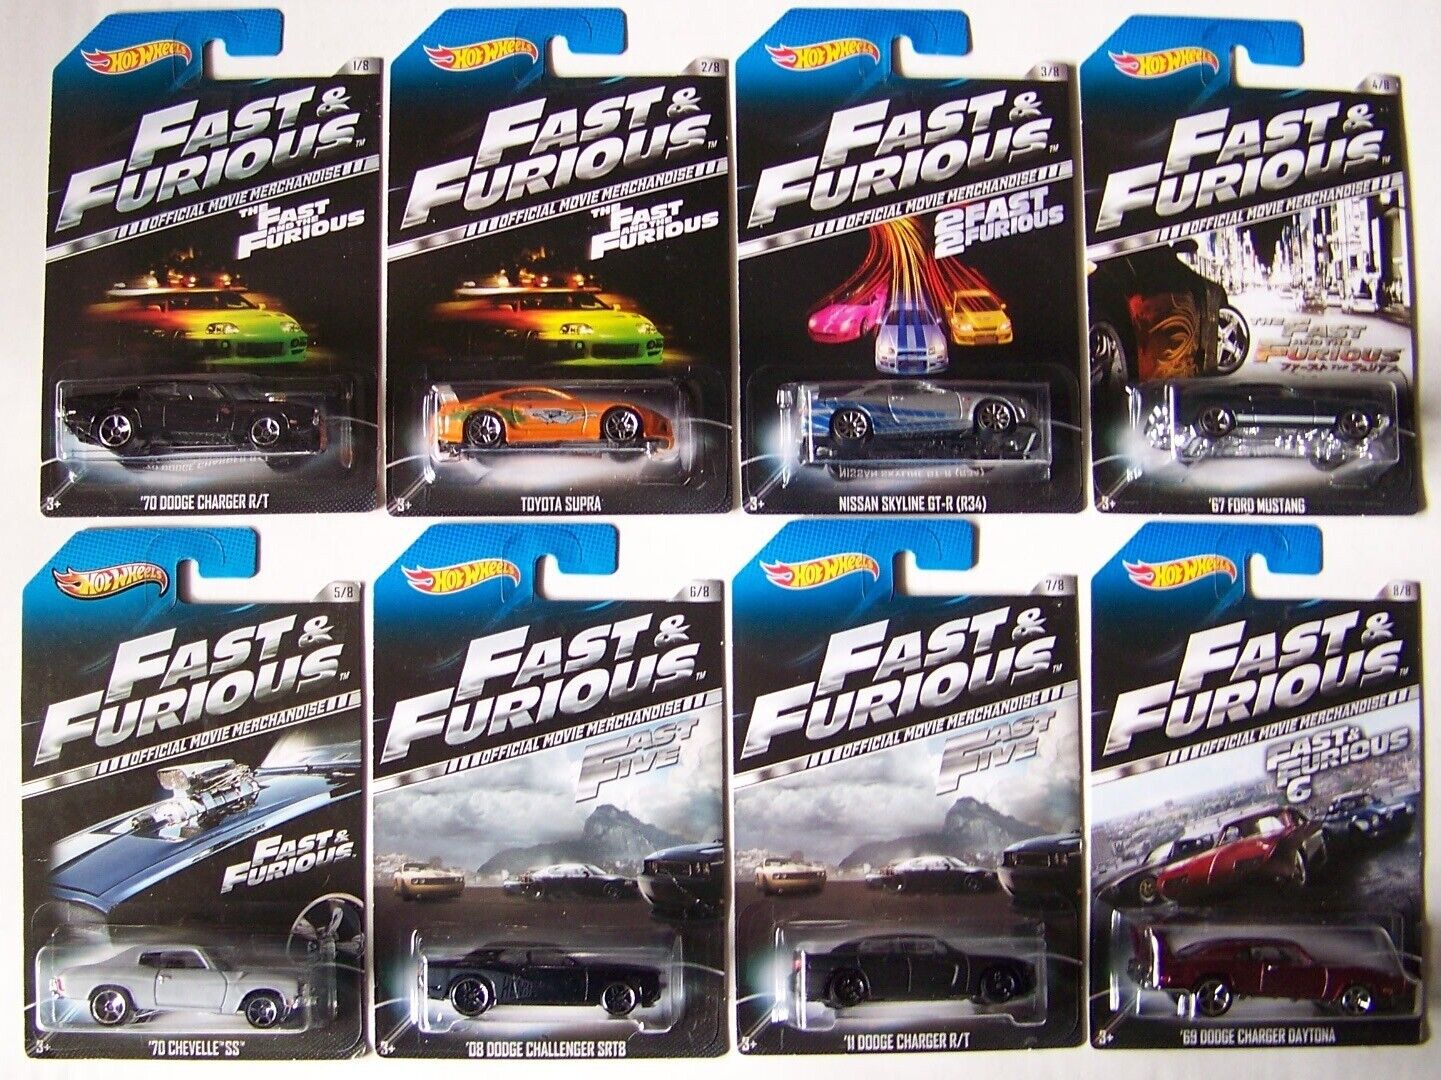 Fast Furious Hot Wheels Collections